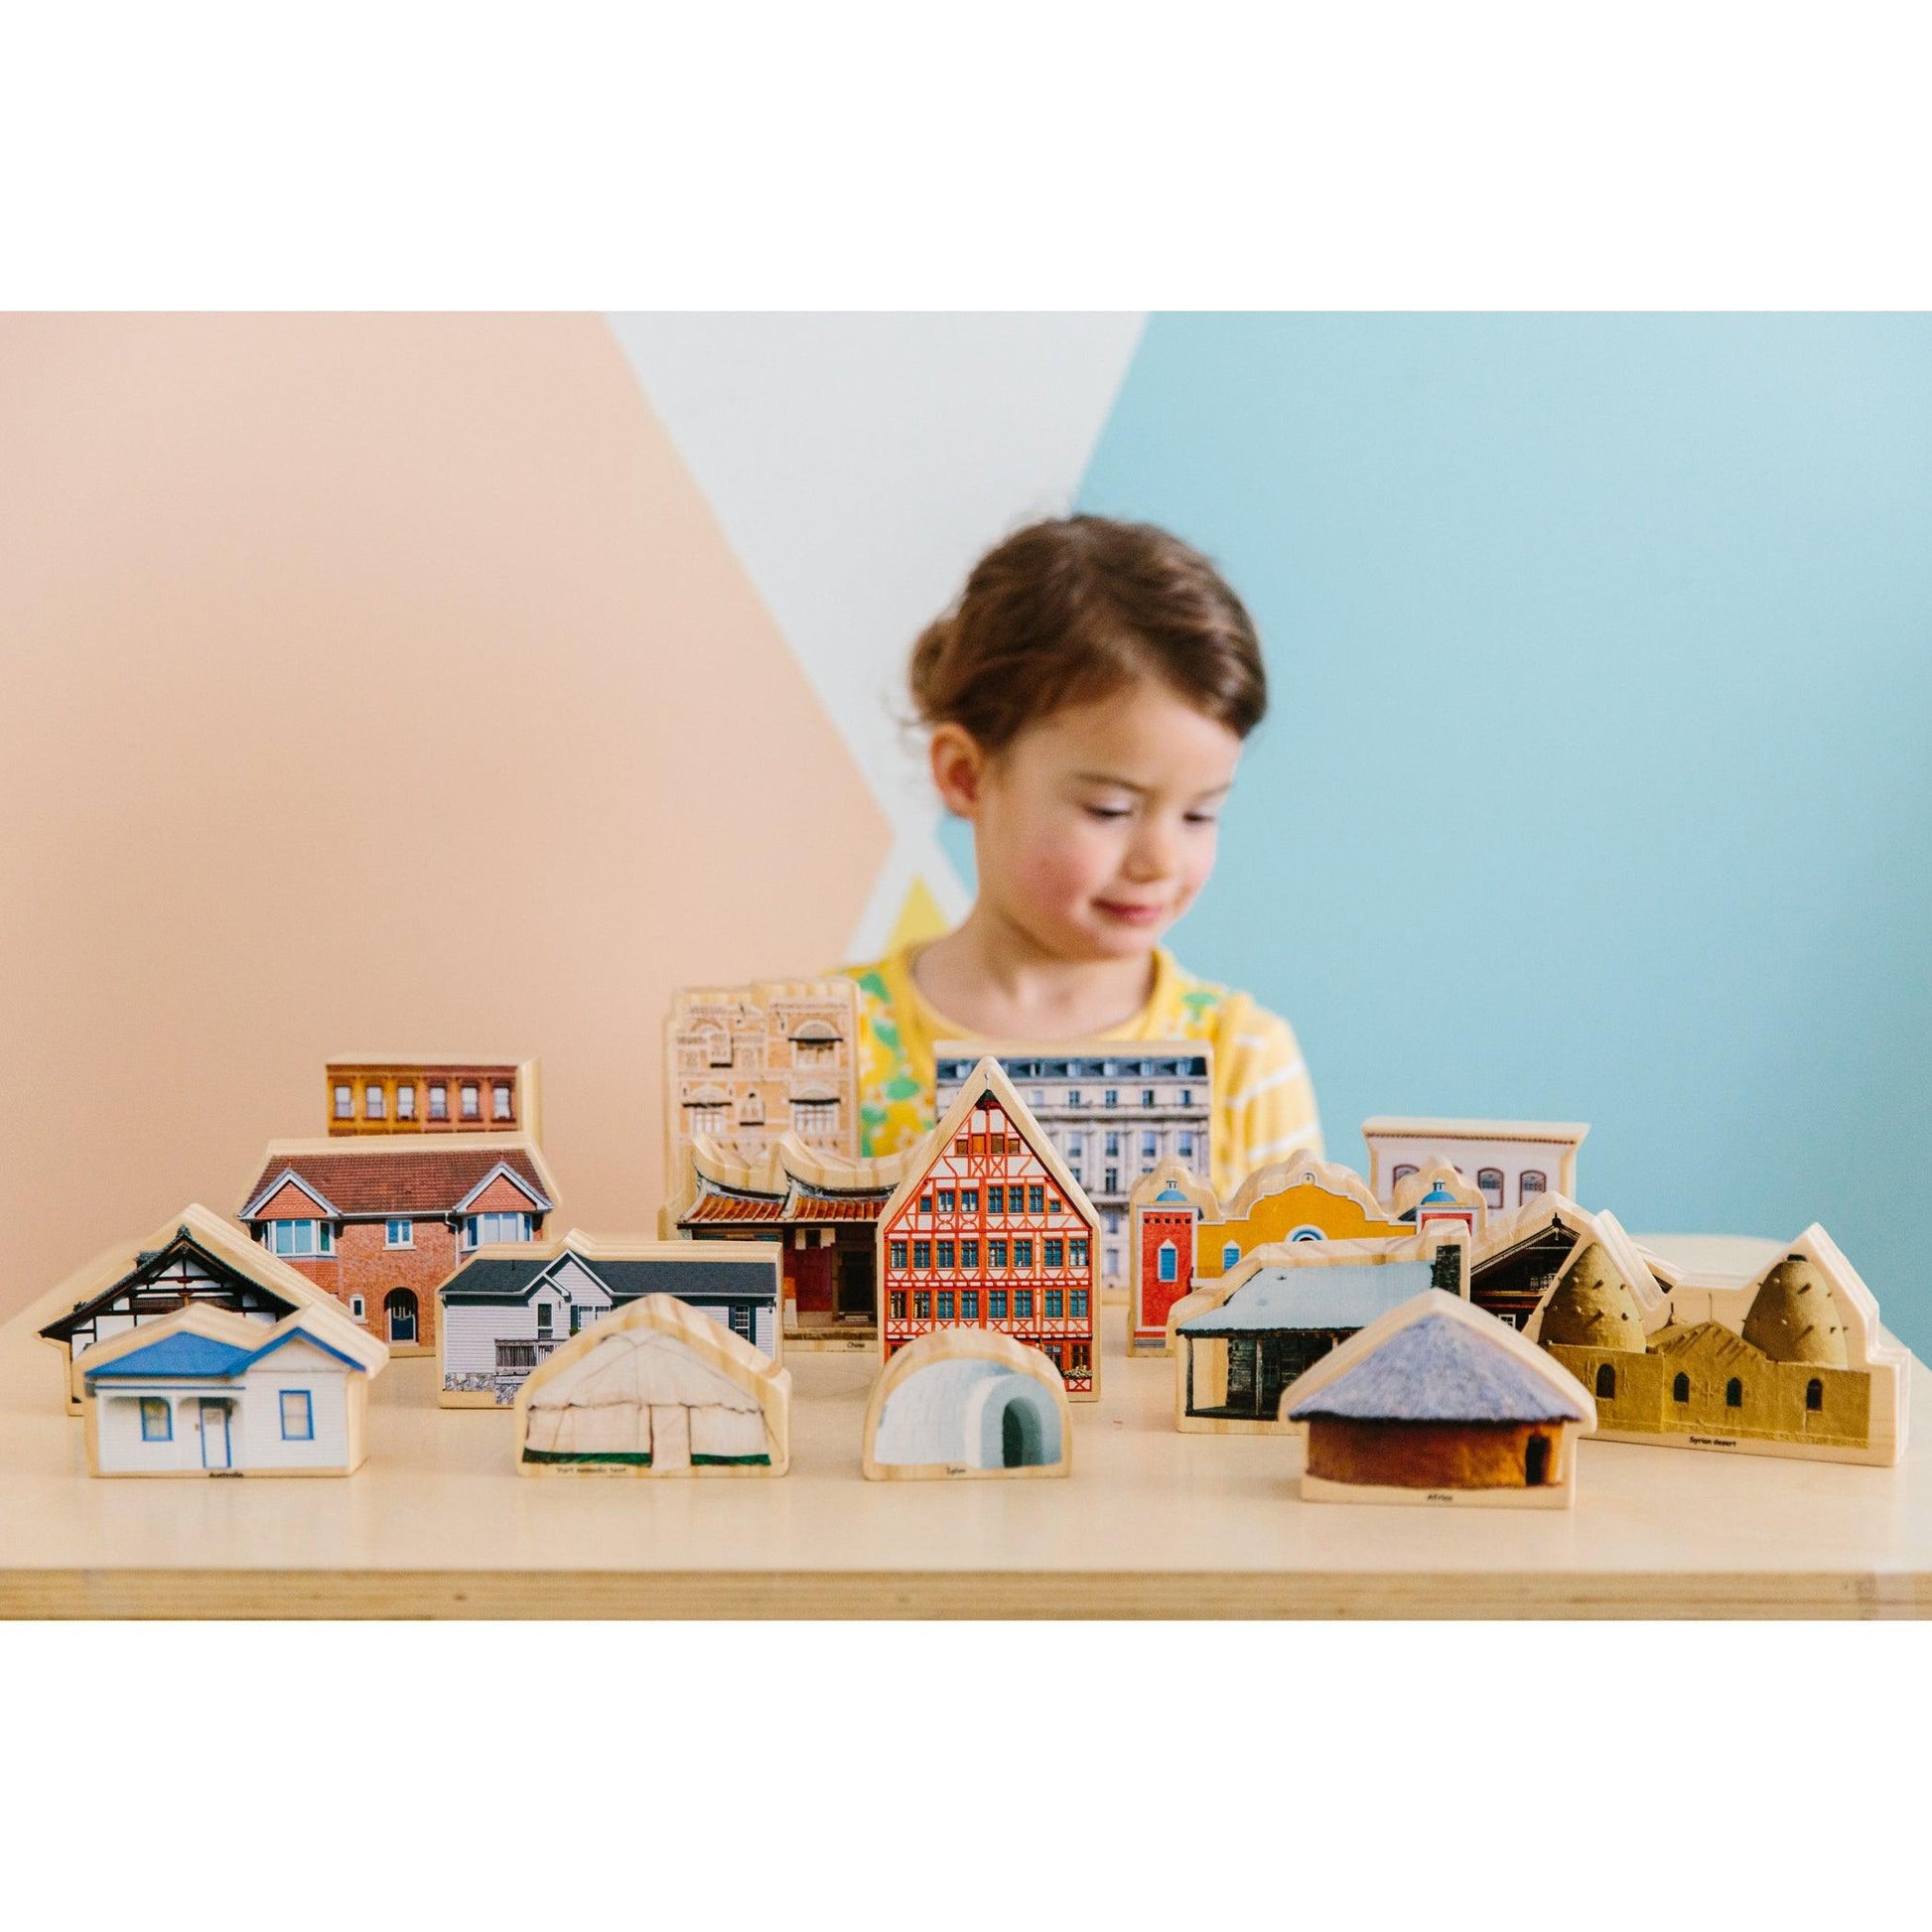 Where I Live? Wooden Blocks - Set of 17 - Ages 1+ - Loomini